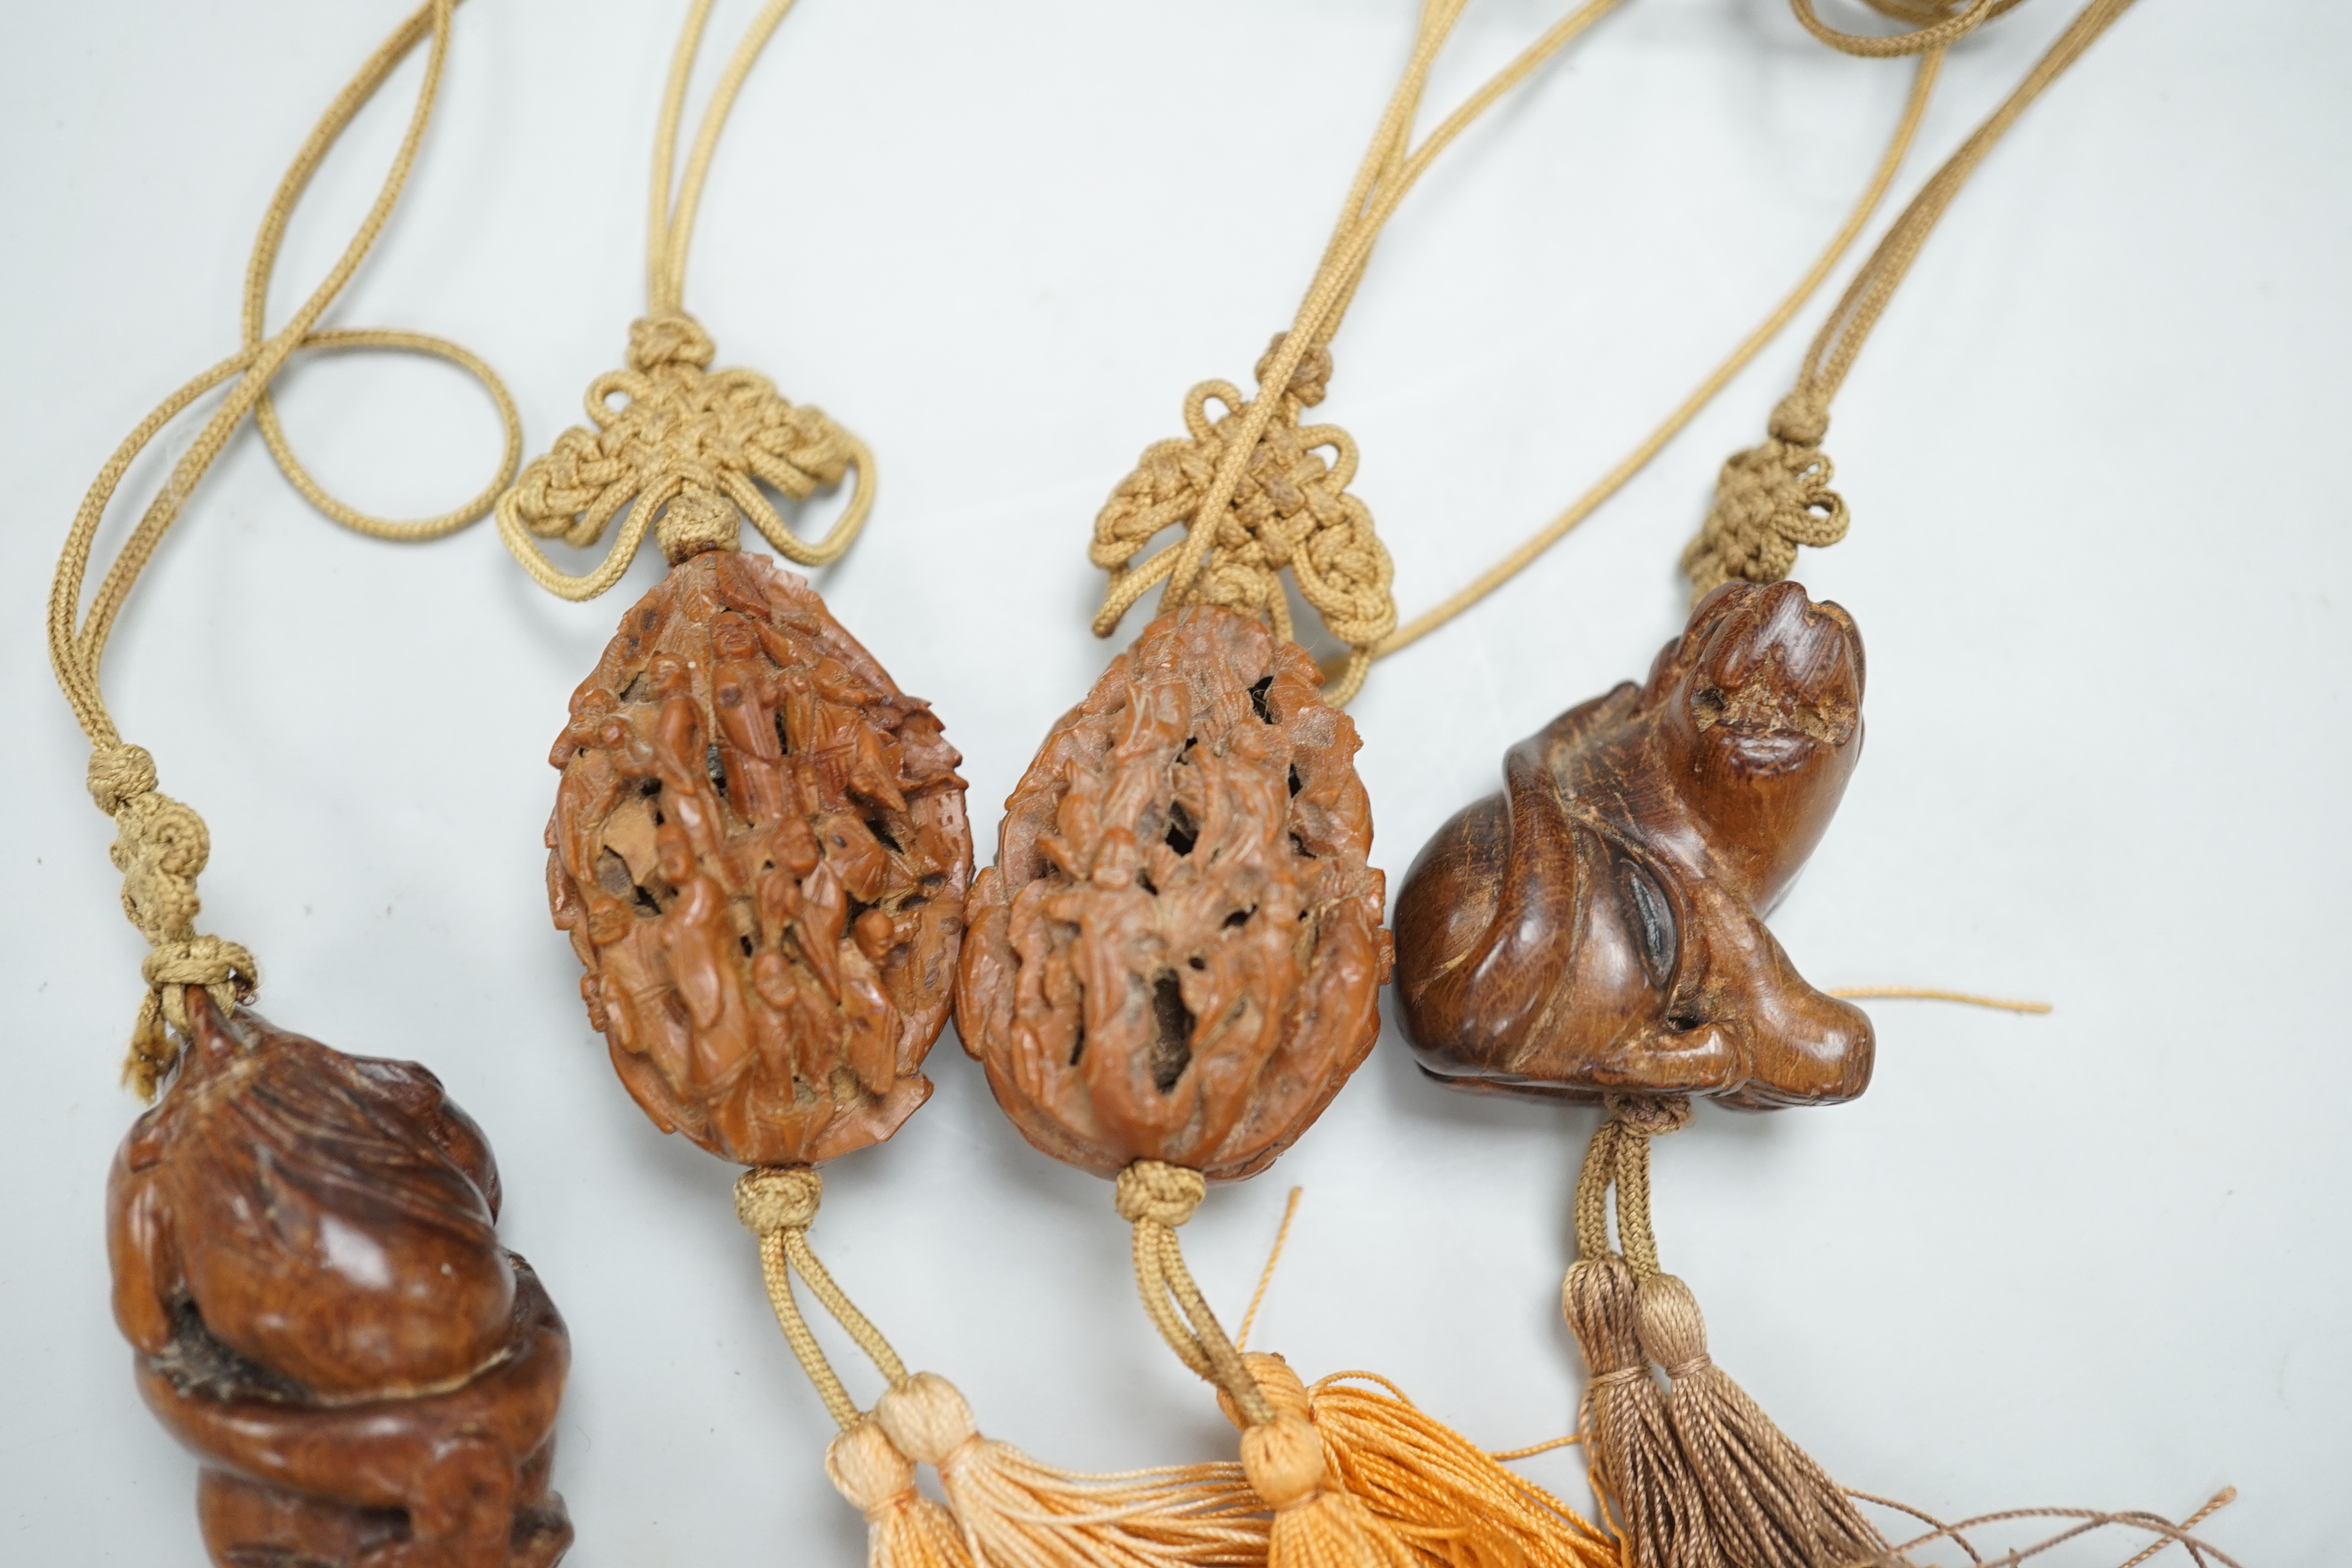 Two Chinese peach stone carvings and two carved wood toggles on a silk cord